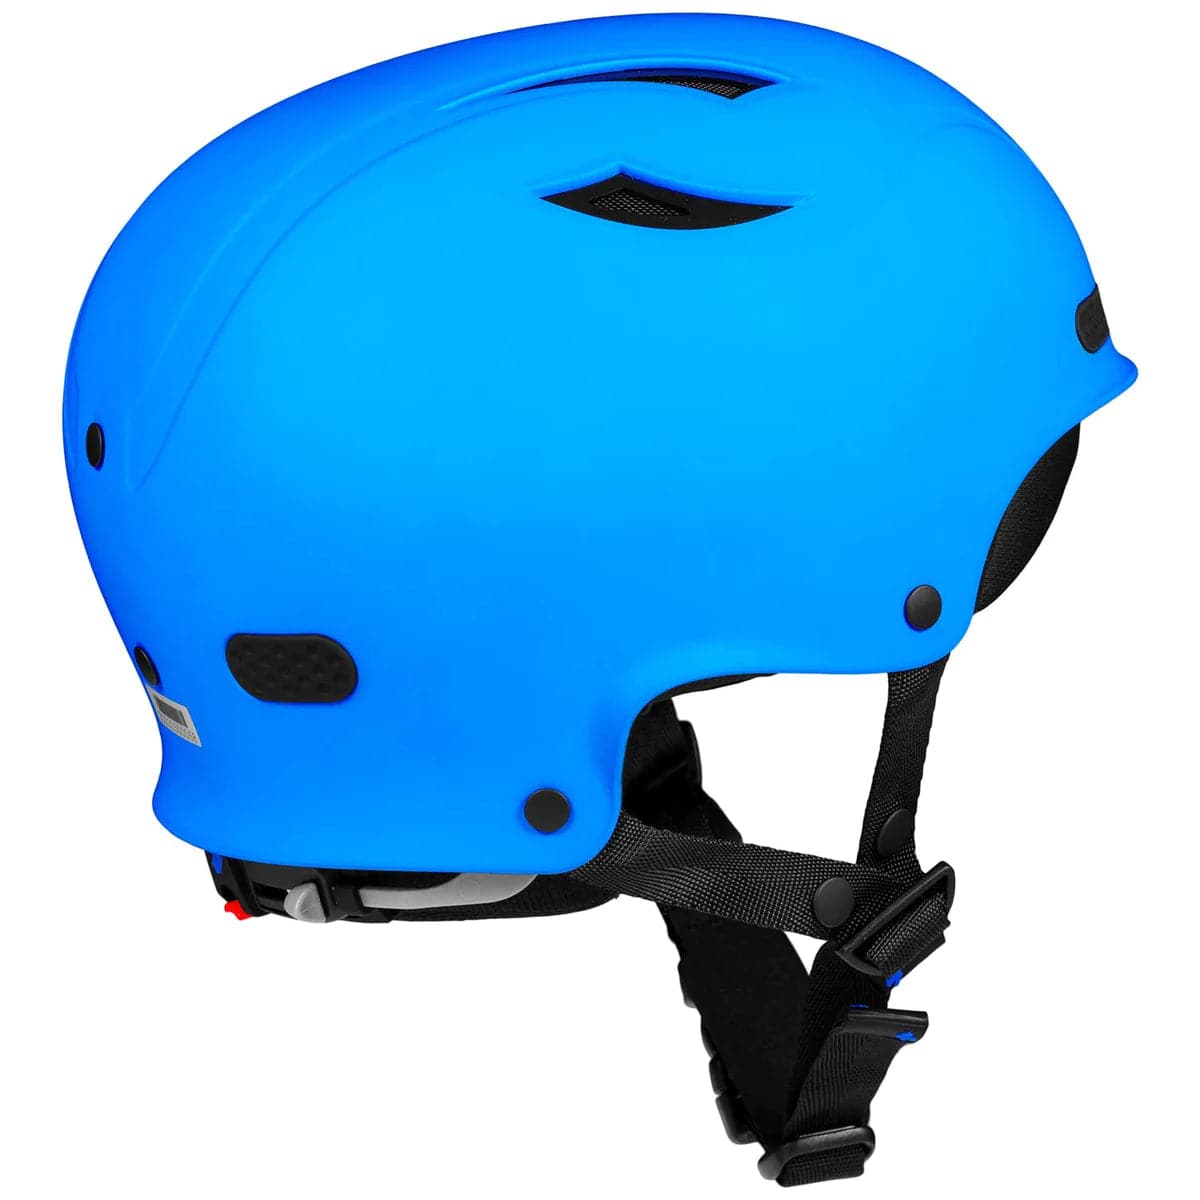 Featuring the Wanderer II Helmet helmet manufactured by Sweet shown here from an eighth angle.